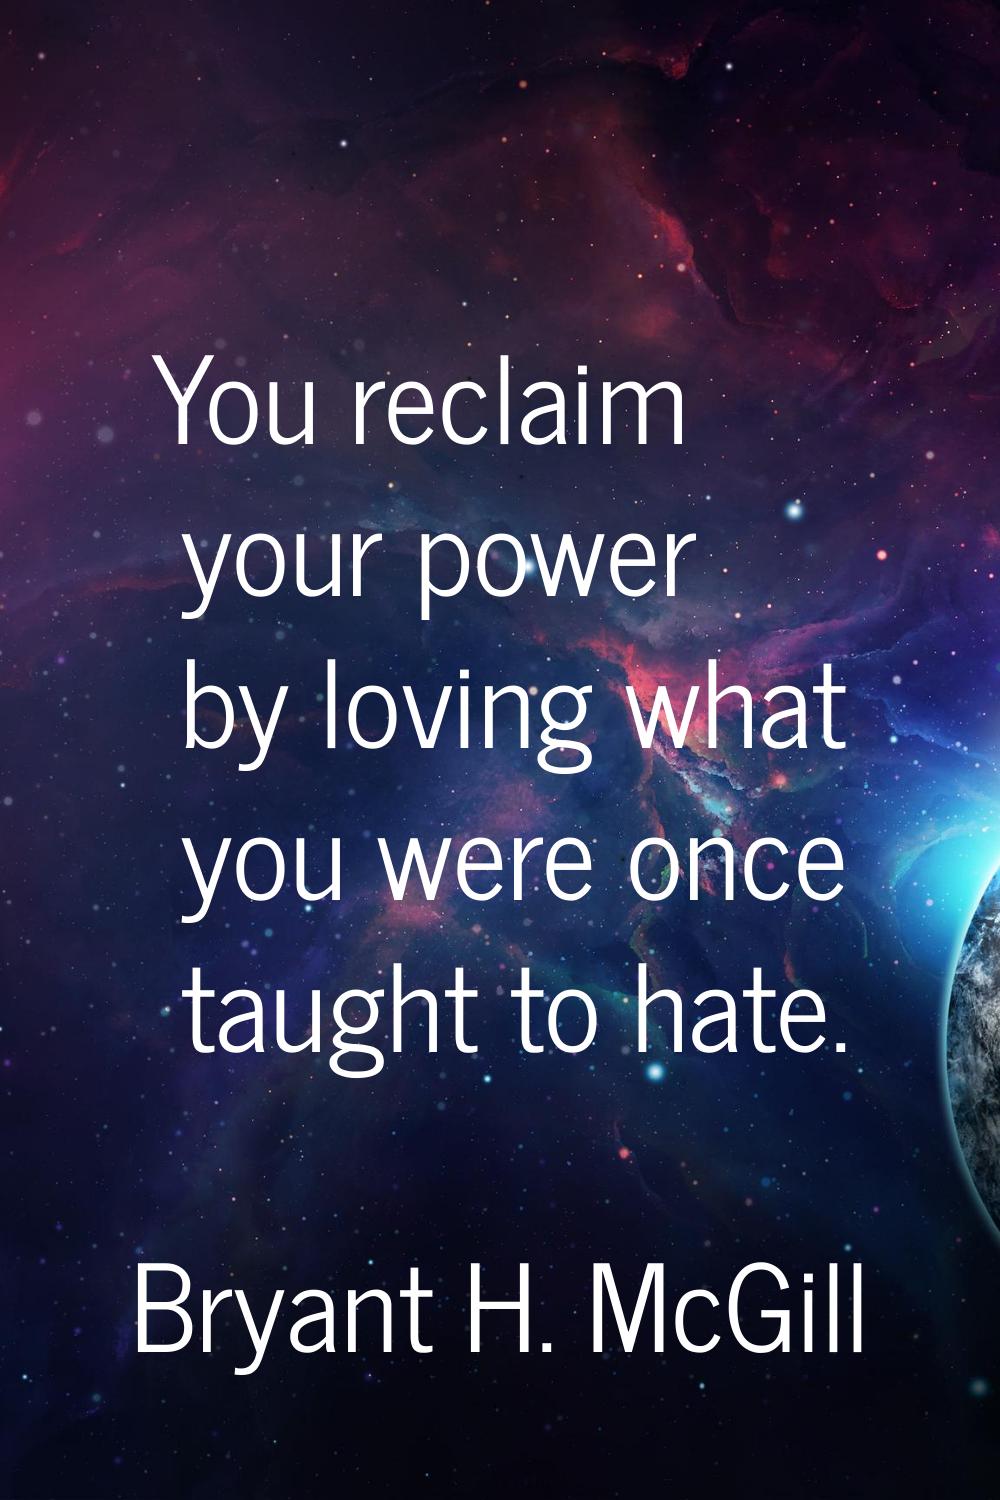 You reclaim your power by loving what you were once taught to hate.